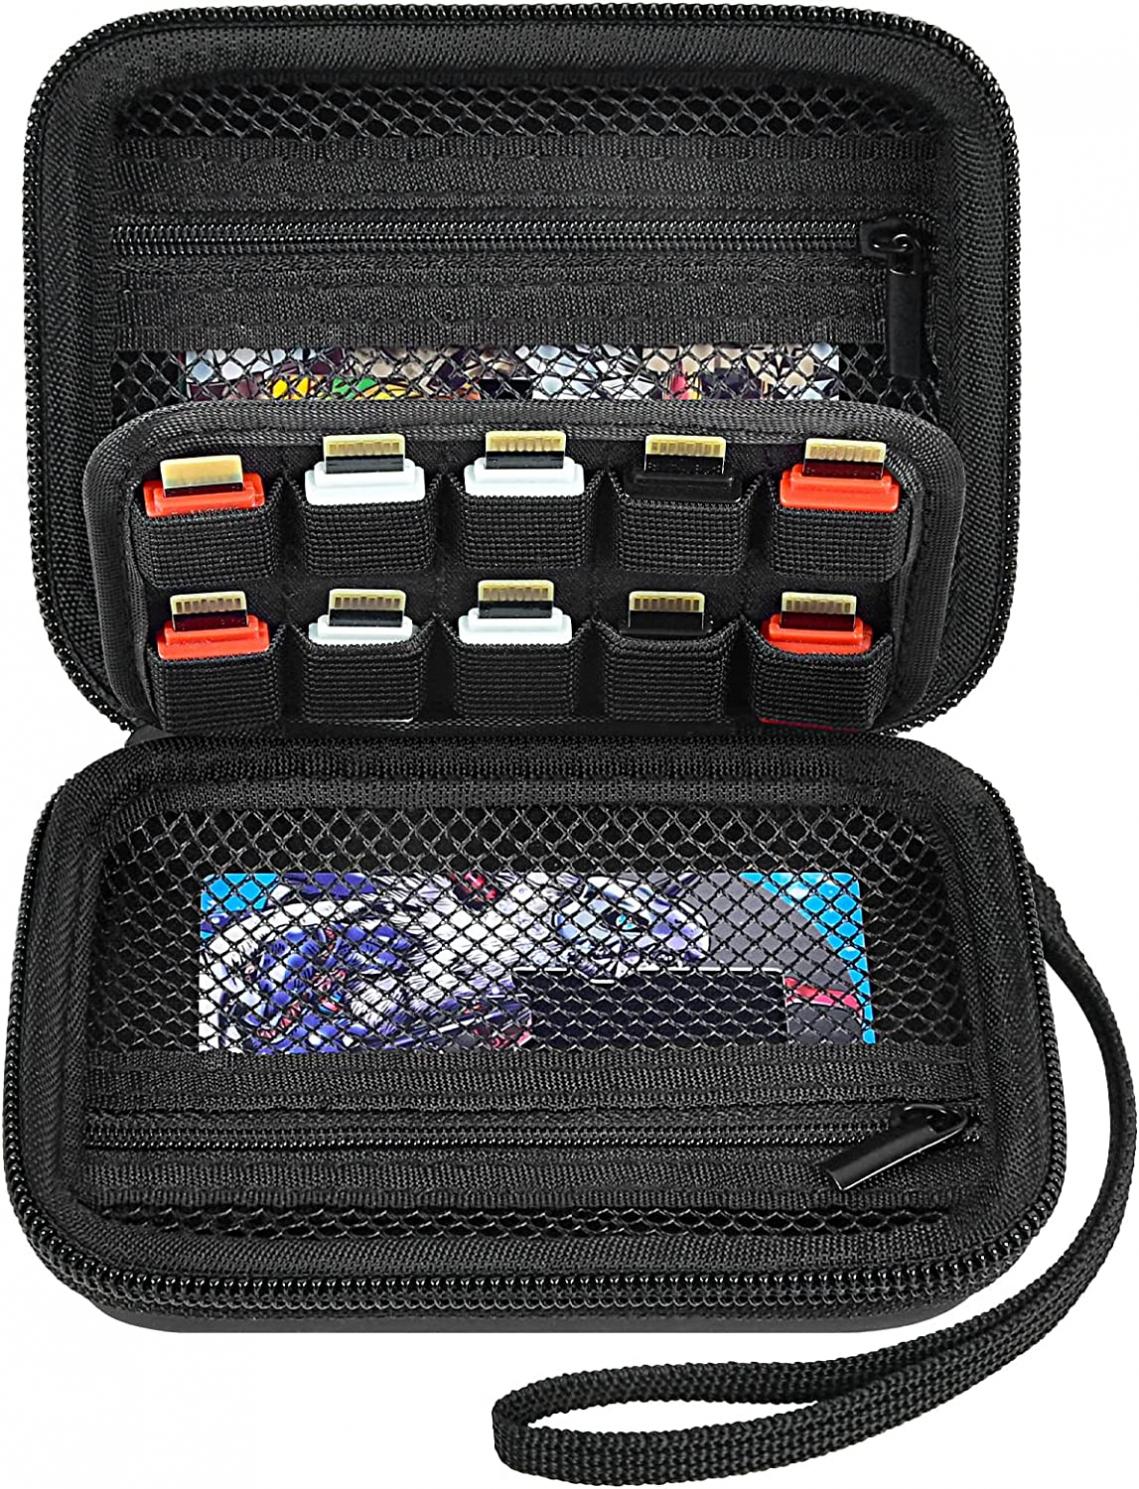 Case Compatible with 20+ Bandai Vital Bracelet Dim Cards, Protective Storage Holder Box for Digital Monster Digimon Dim Card Accessories(Bag Only)